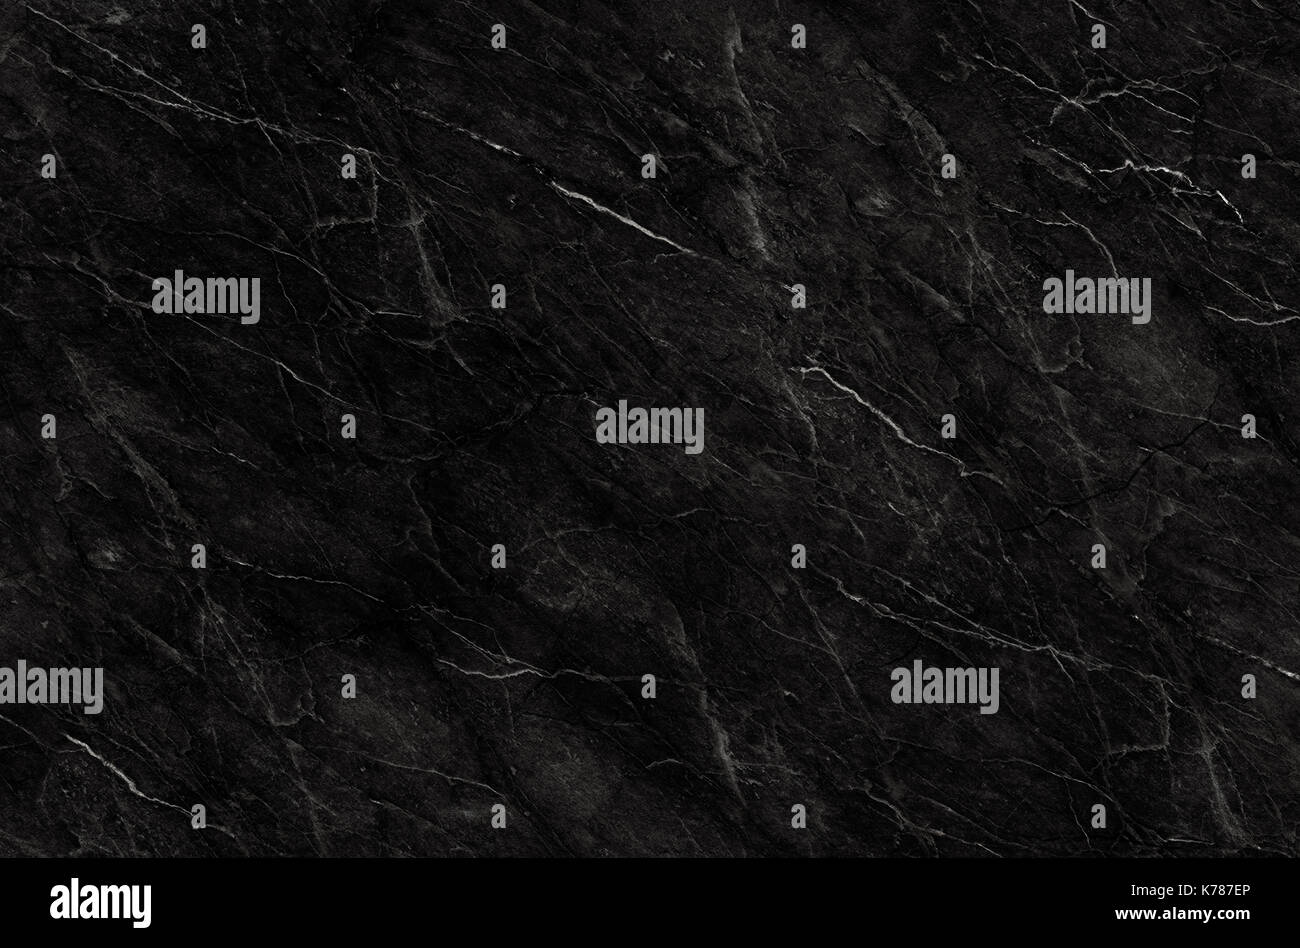 Black marble natural pattern for background, abstract black and white, granite texture Stock Photo